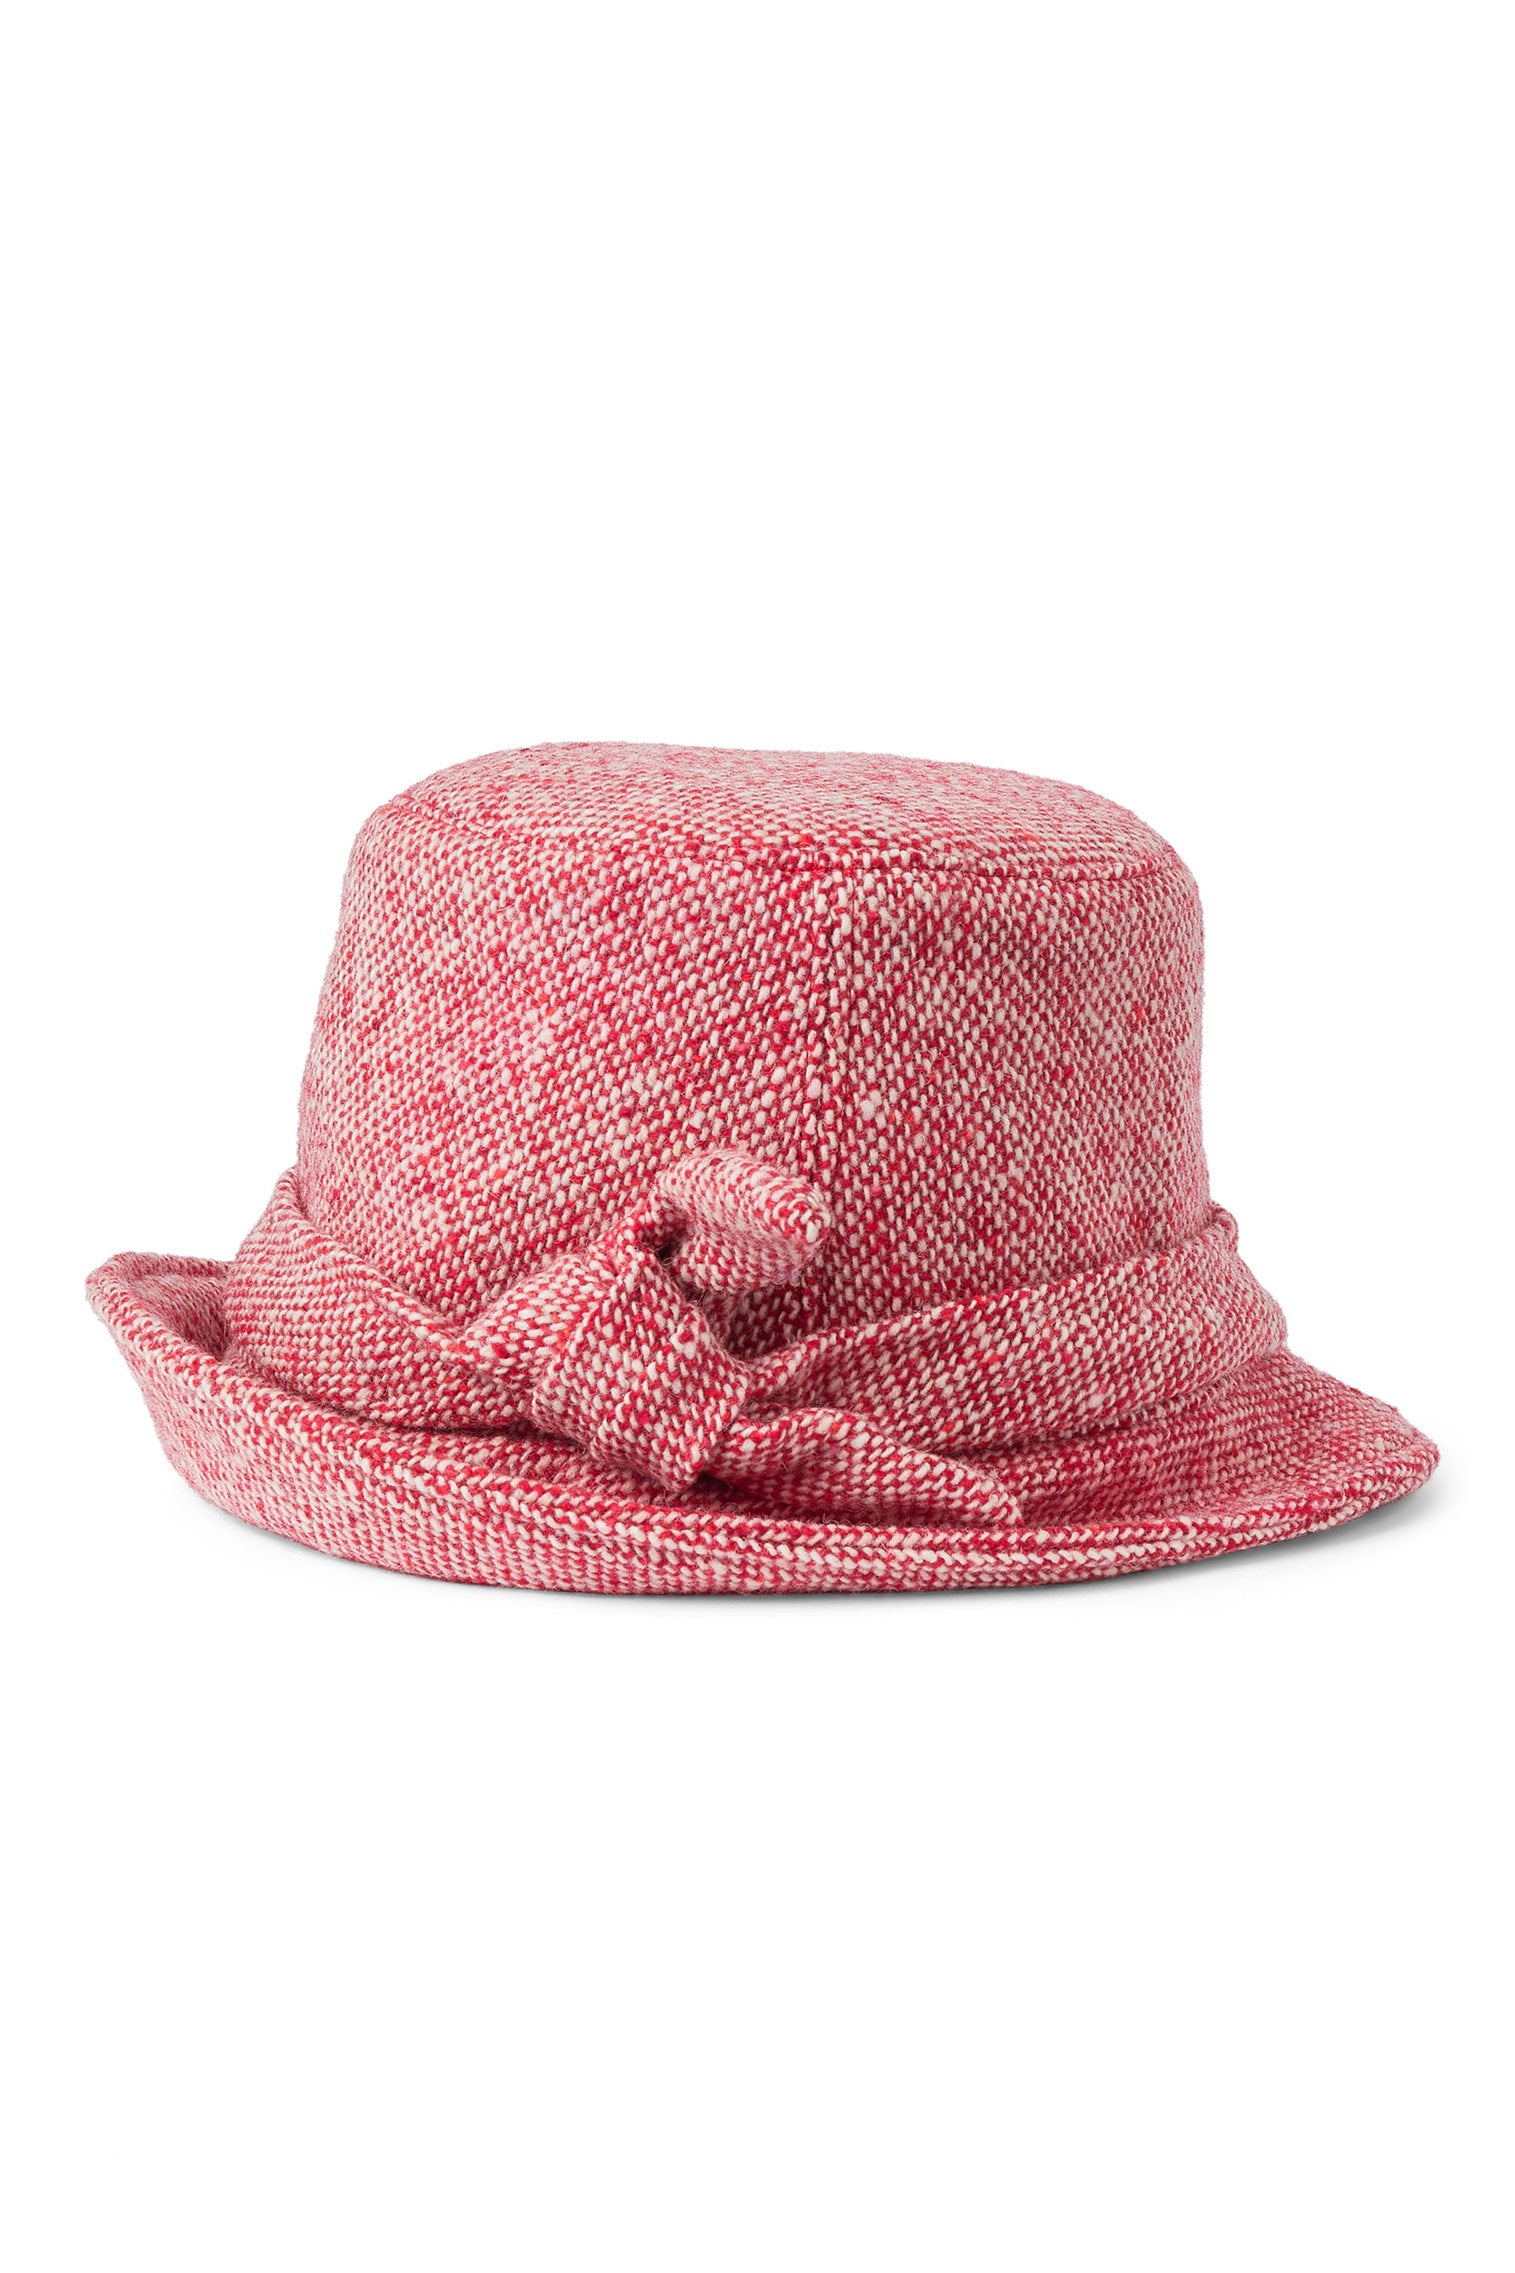 Dolores Red Cloche - Women's Fedoras, Trilbies & Cloches - Lock & Co. Hatters London UK